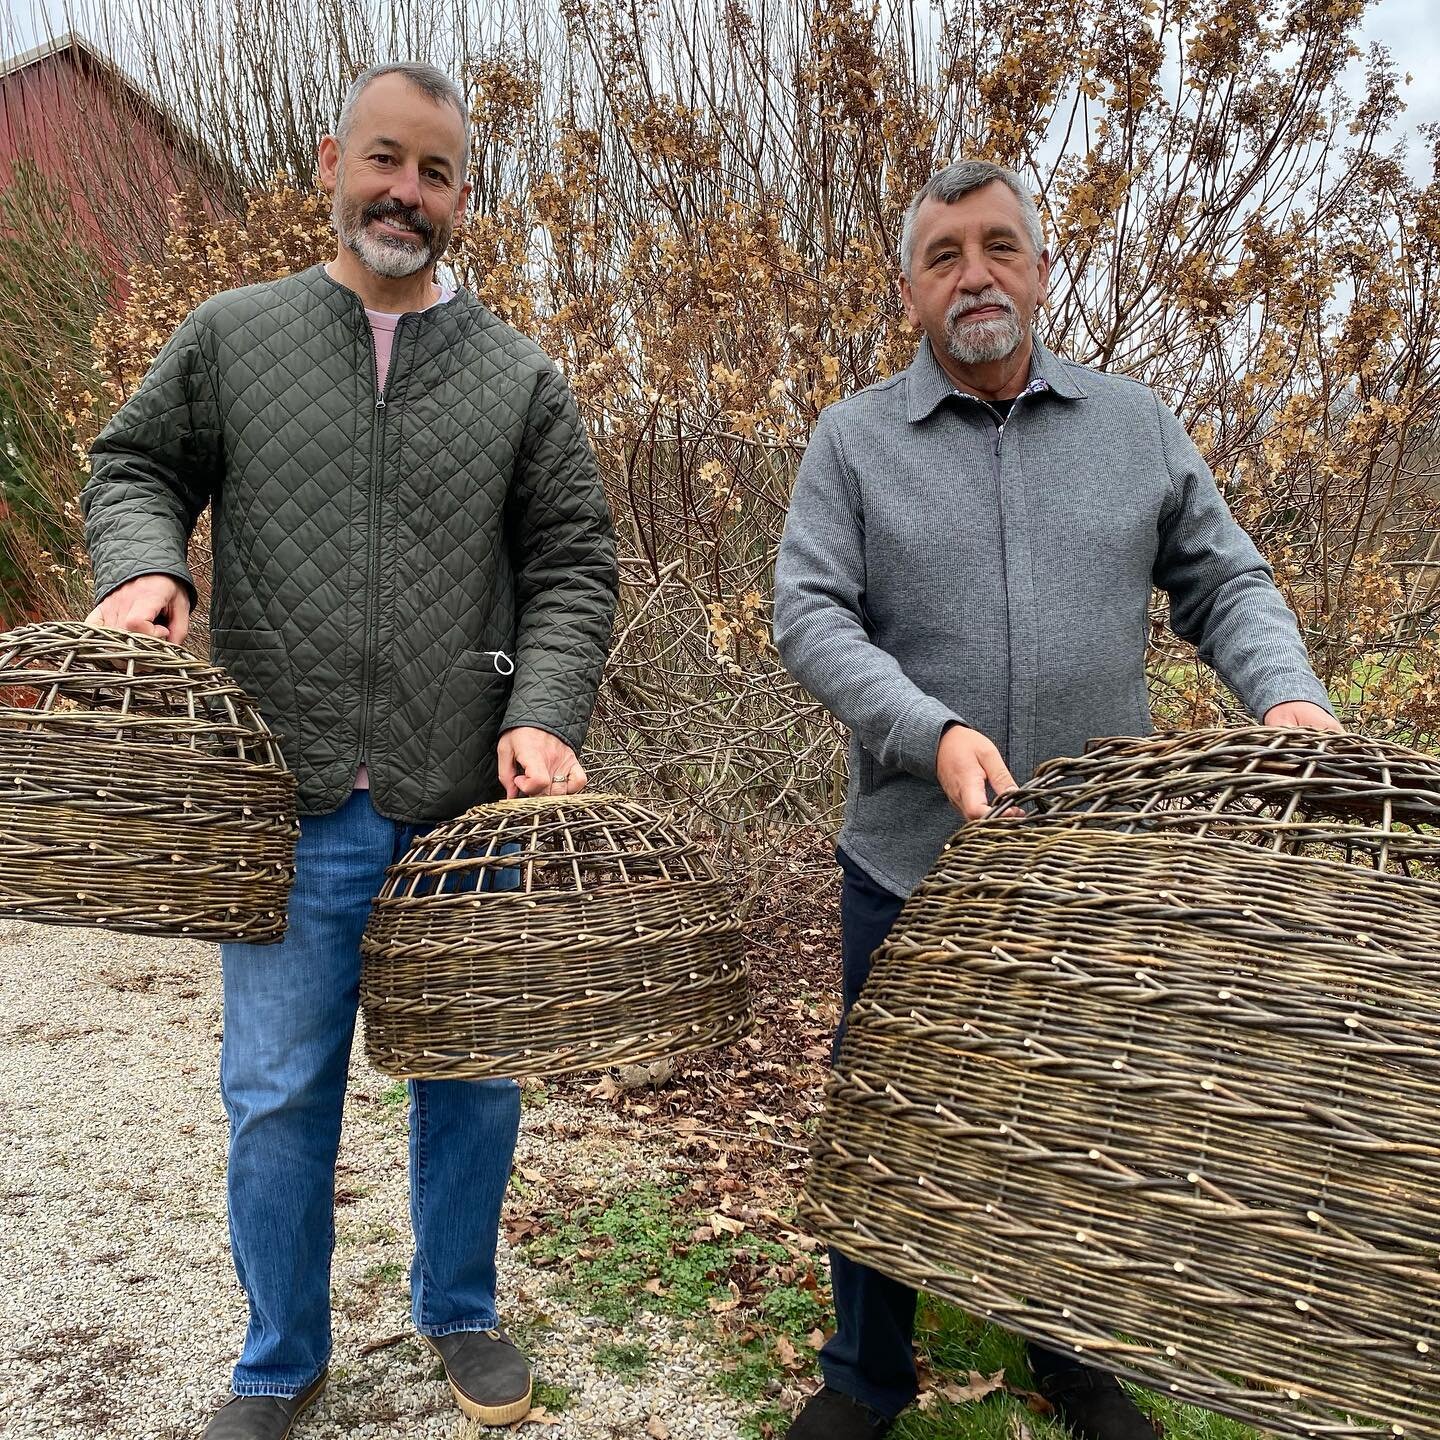 Willow woven lighting fixtures for 2 friends and clients.  #basketweaving #basketry #basketmaker #basketweave #basketweaver #wovenmasket #willowbasket #willowbaskets